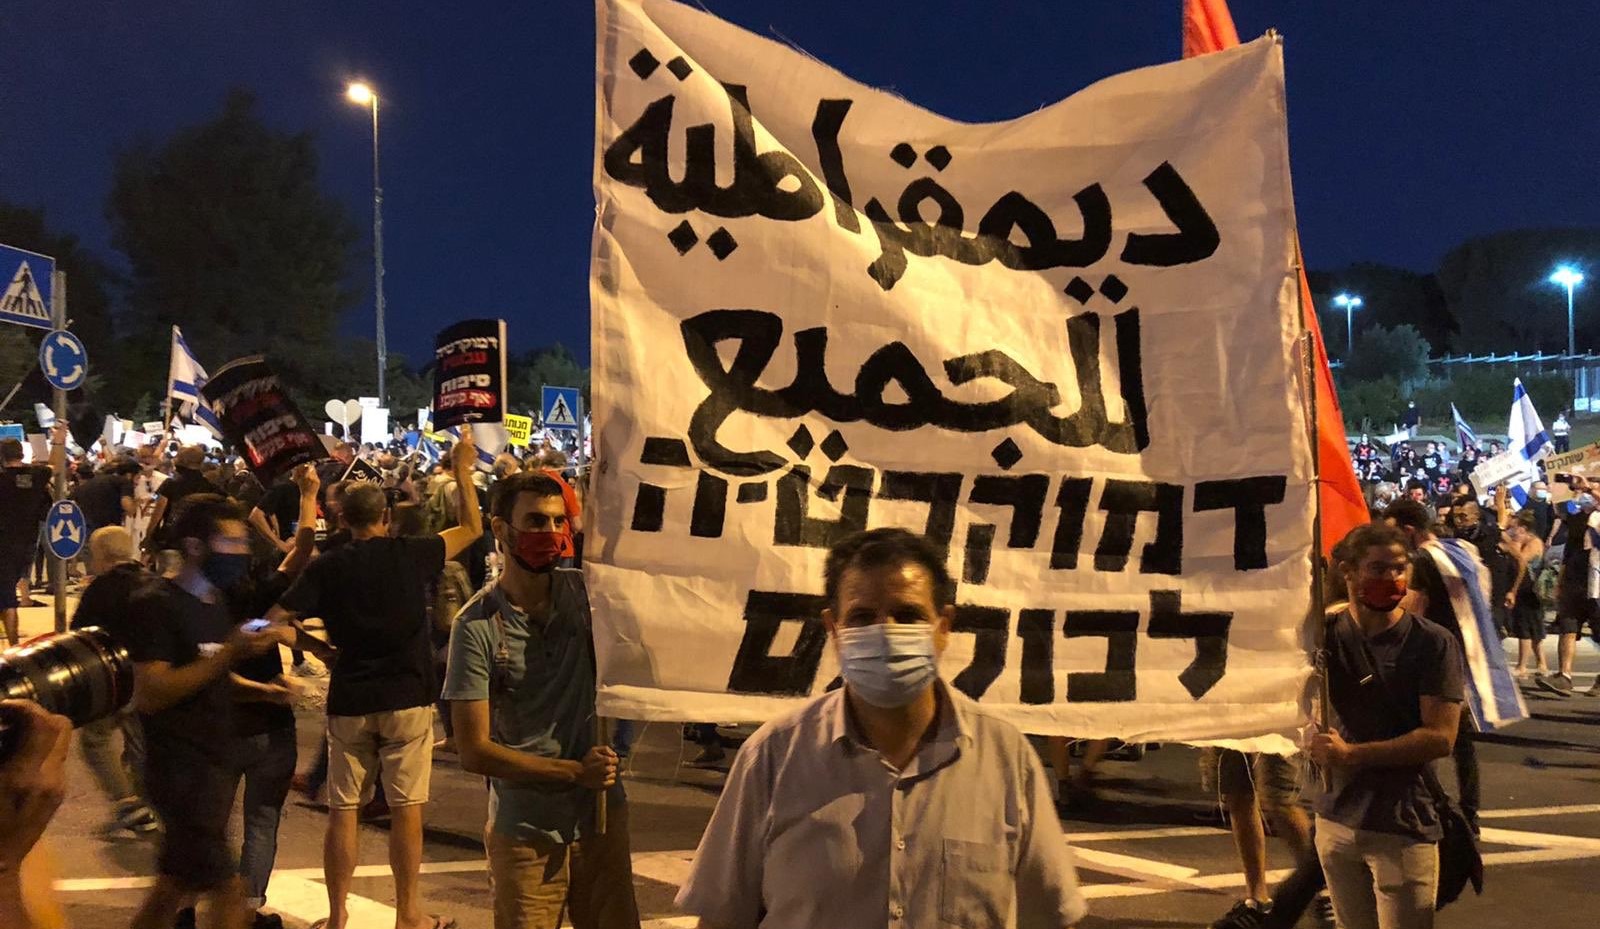 Joint List leader, MK Ayman Odeh, during the Jerusalem demonstration against Prime Minister Netanyahu on Tuesday, July 21, 2020. The banner in Arabic and Hebrew reads "Democracy for all."